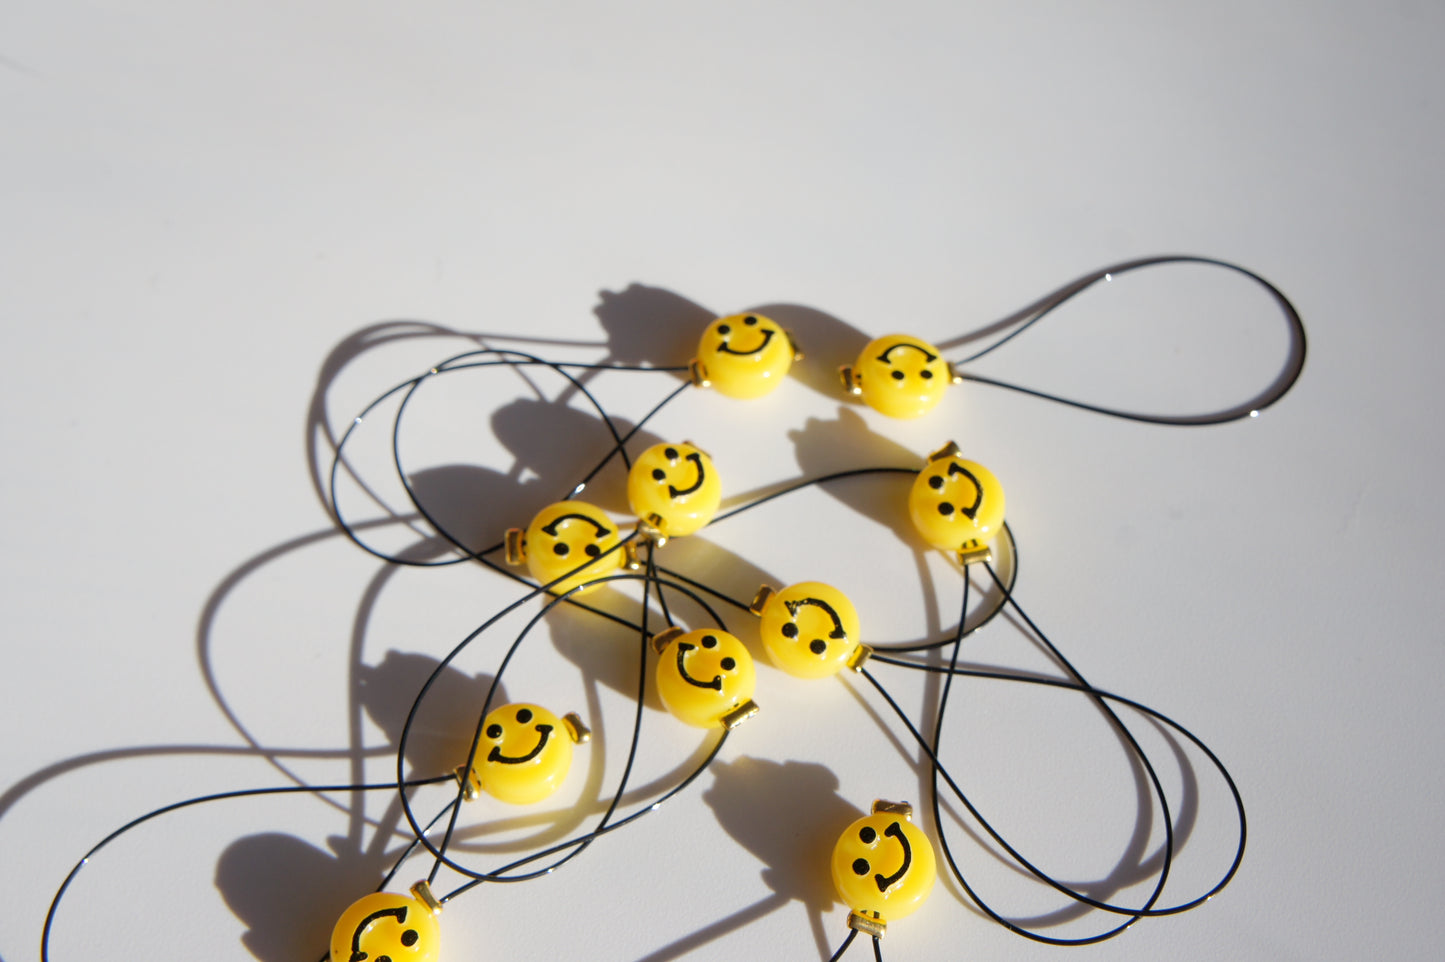 100% Handmade Stitch Markers - Heart/Smiley face/Star